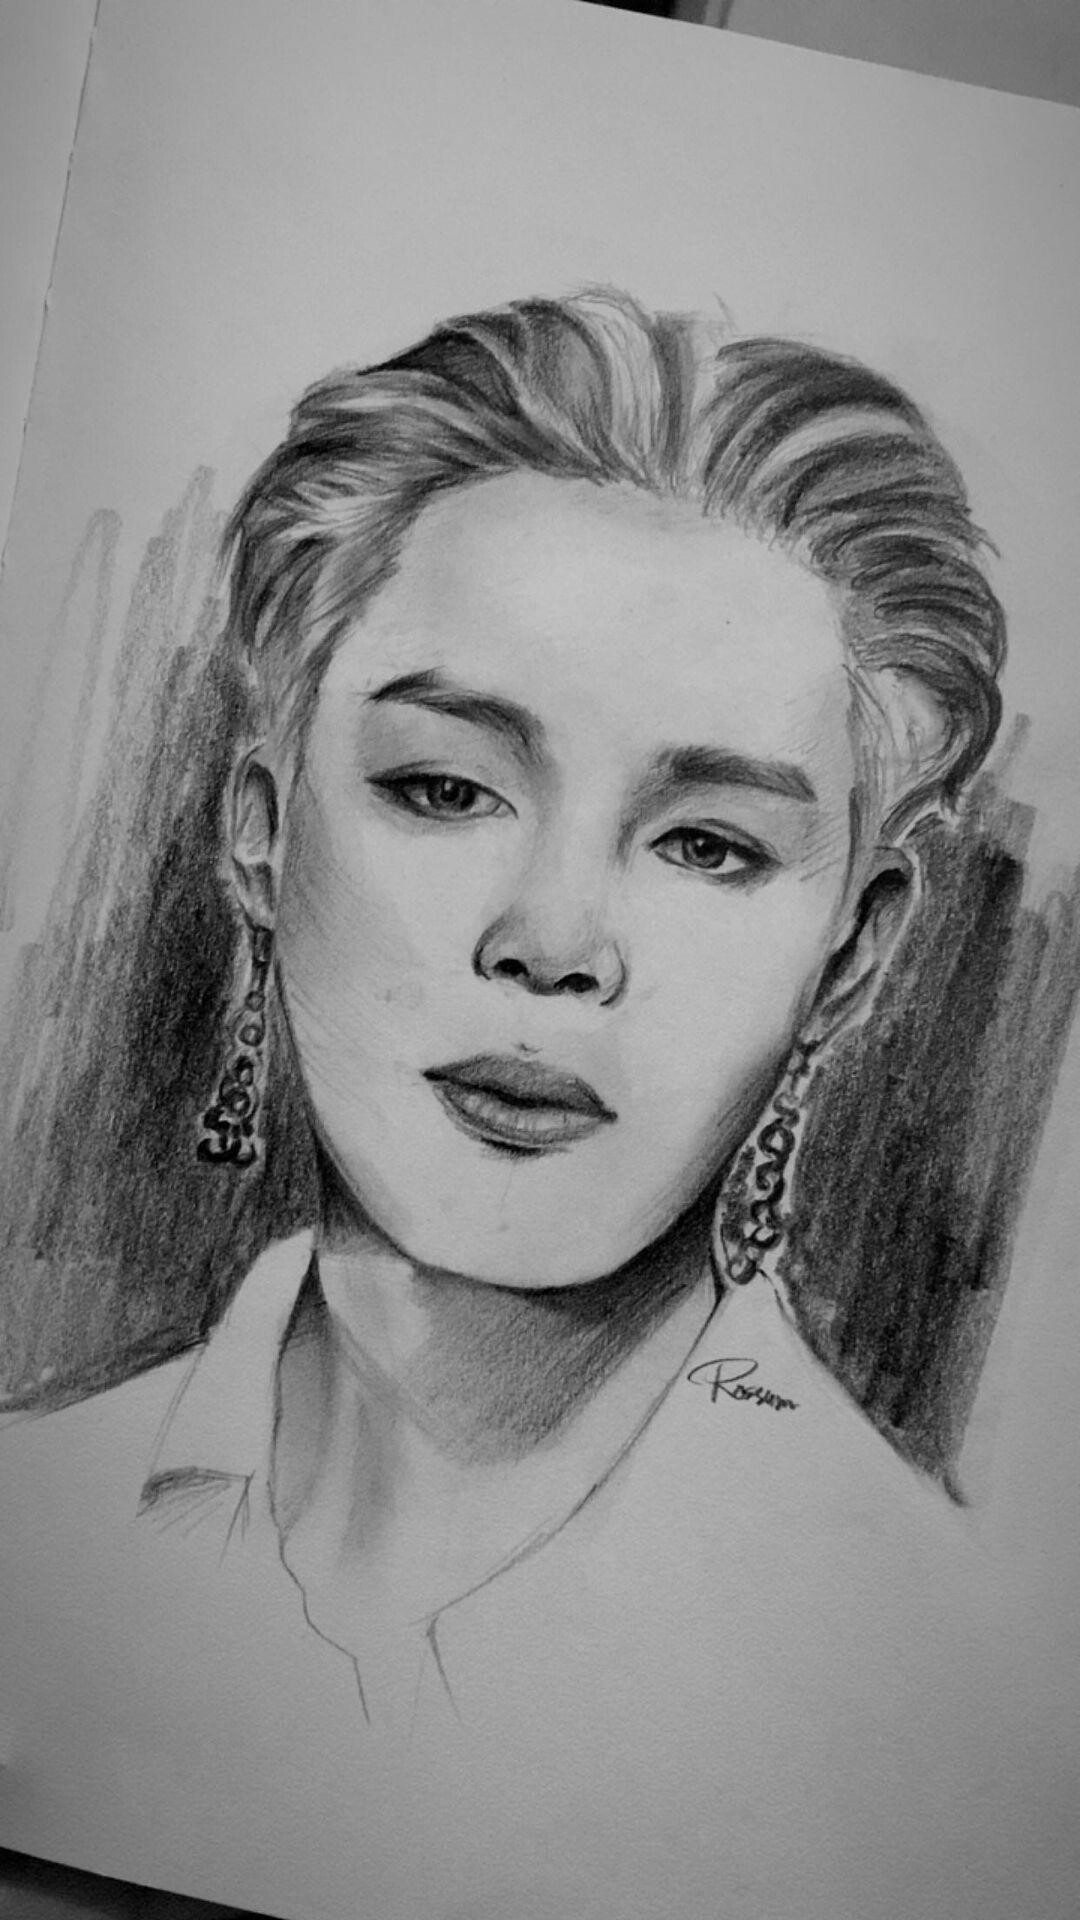 Drawings, Jimin of bts, Page 1919, Art by Independent Artists